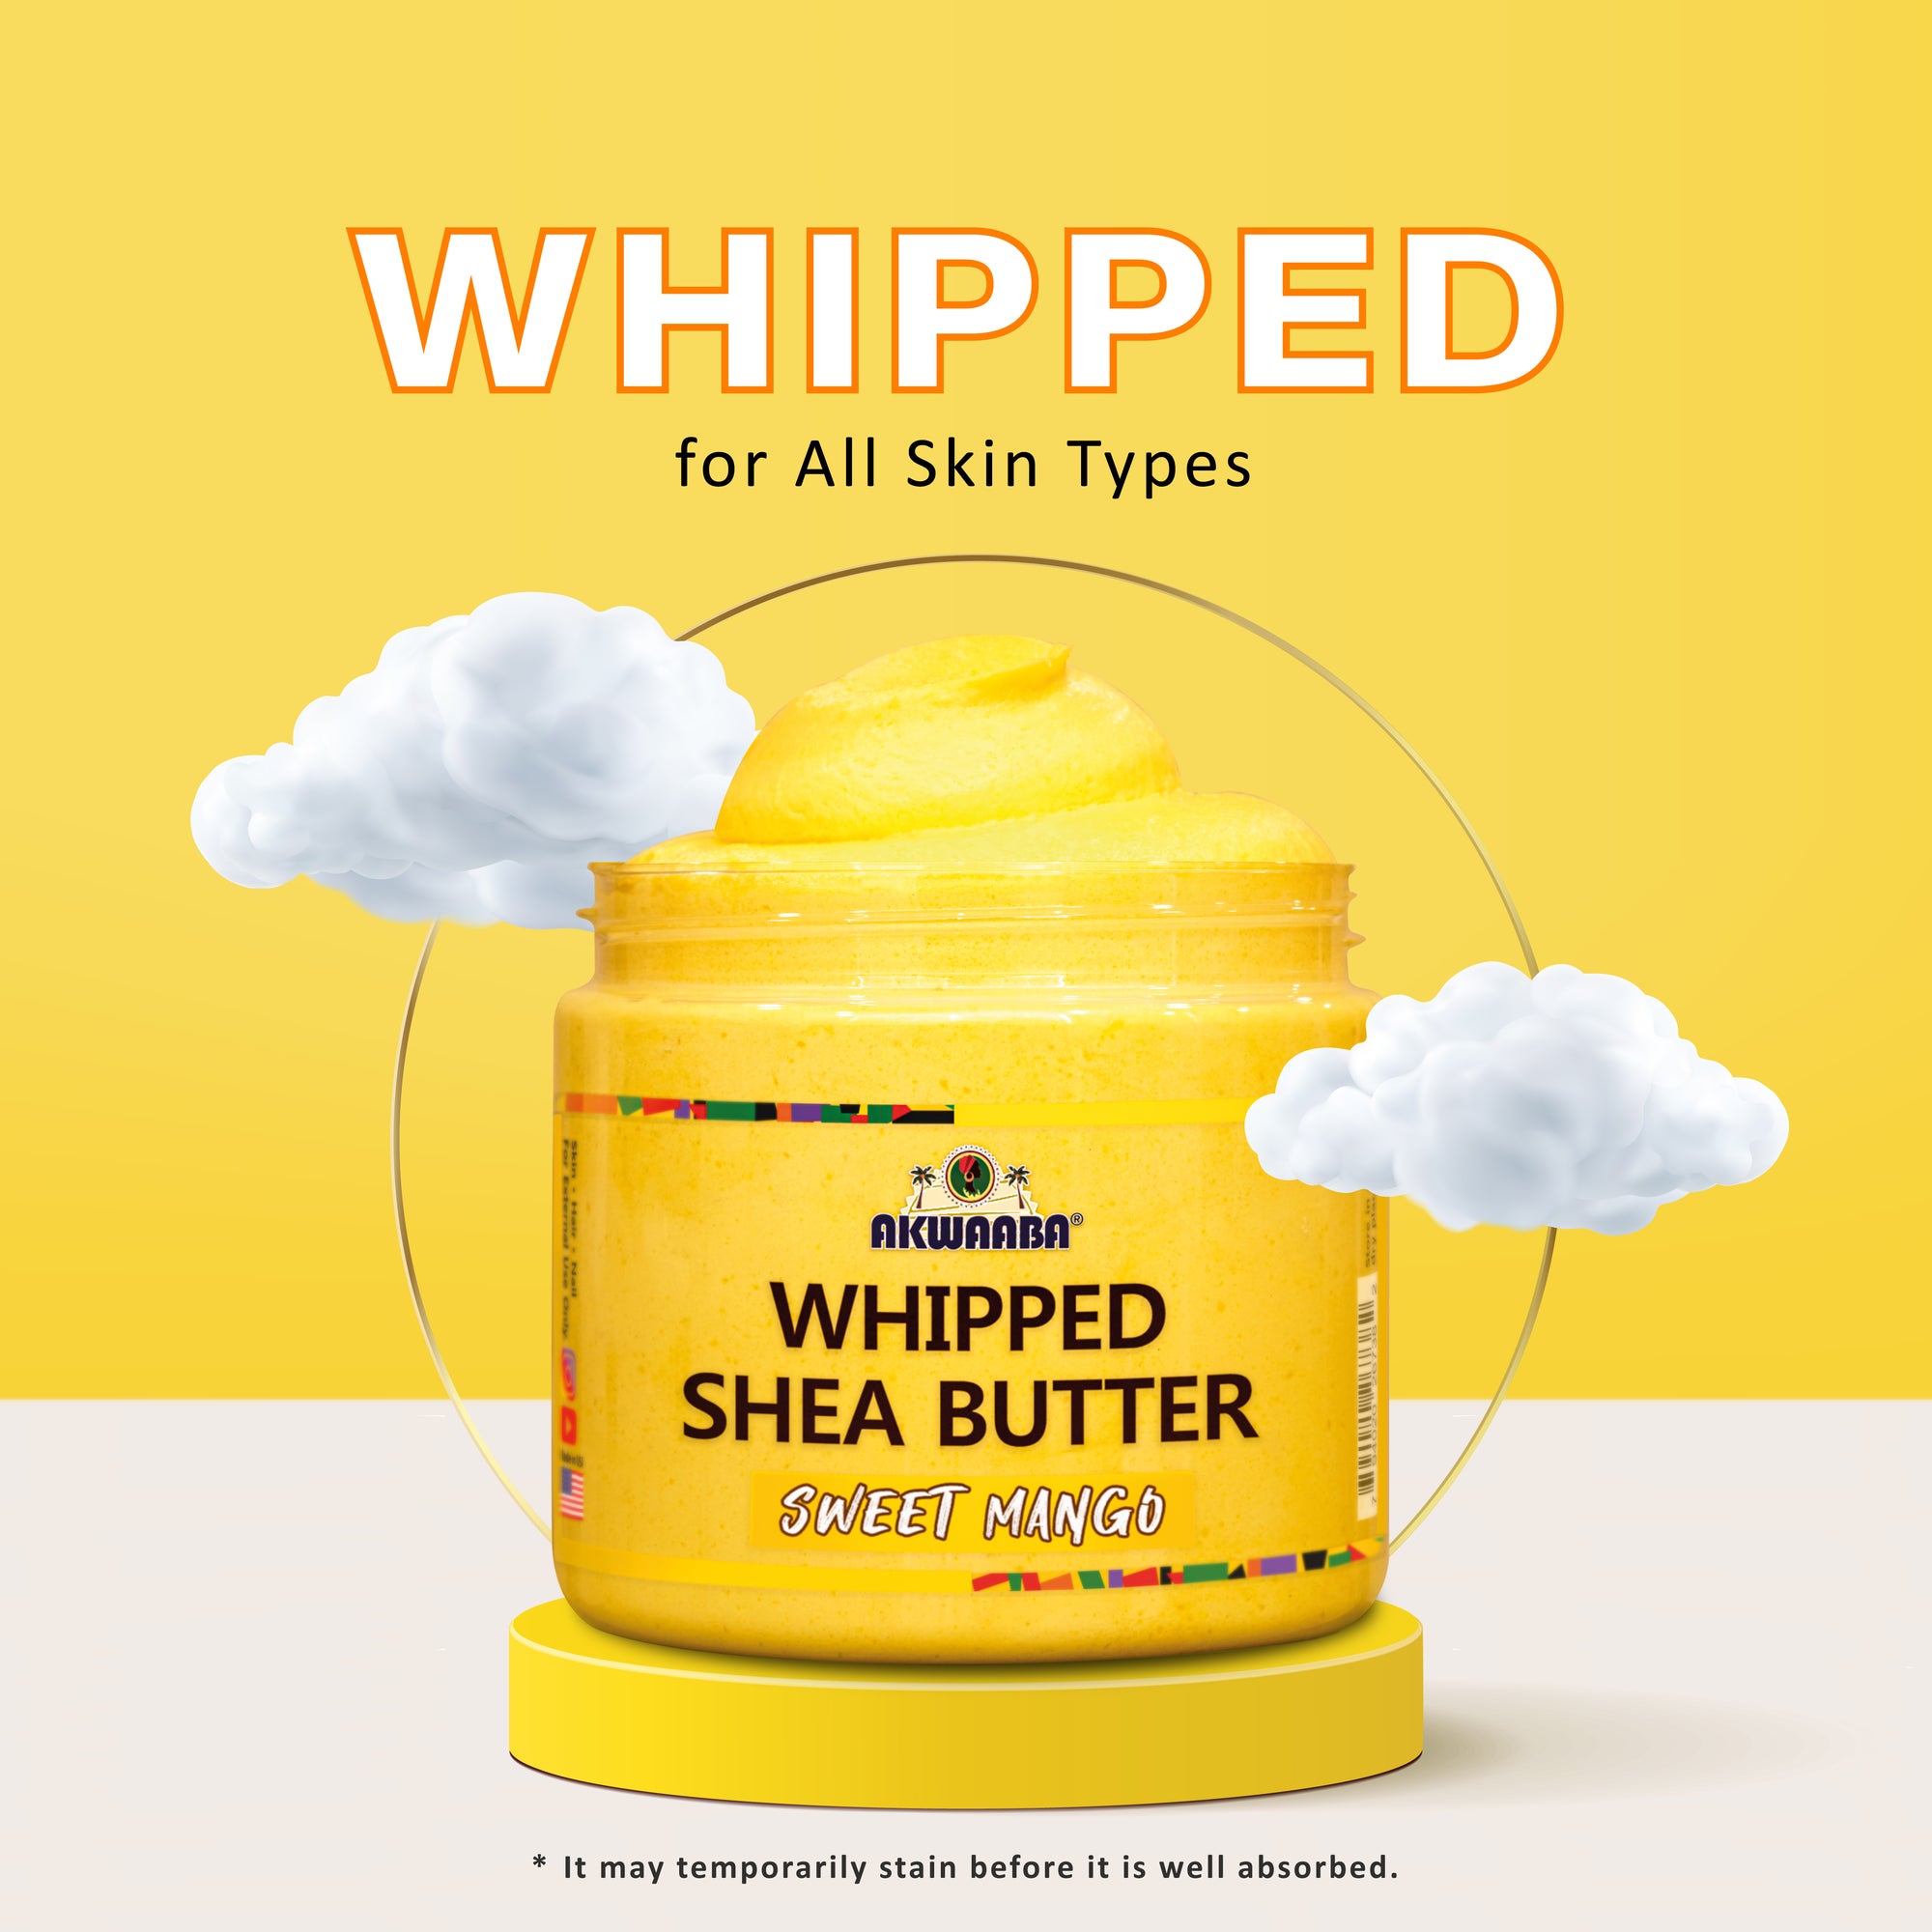 Whipped Shea Butter(Pink Cat) - 12 oz.